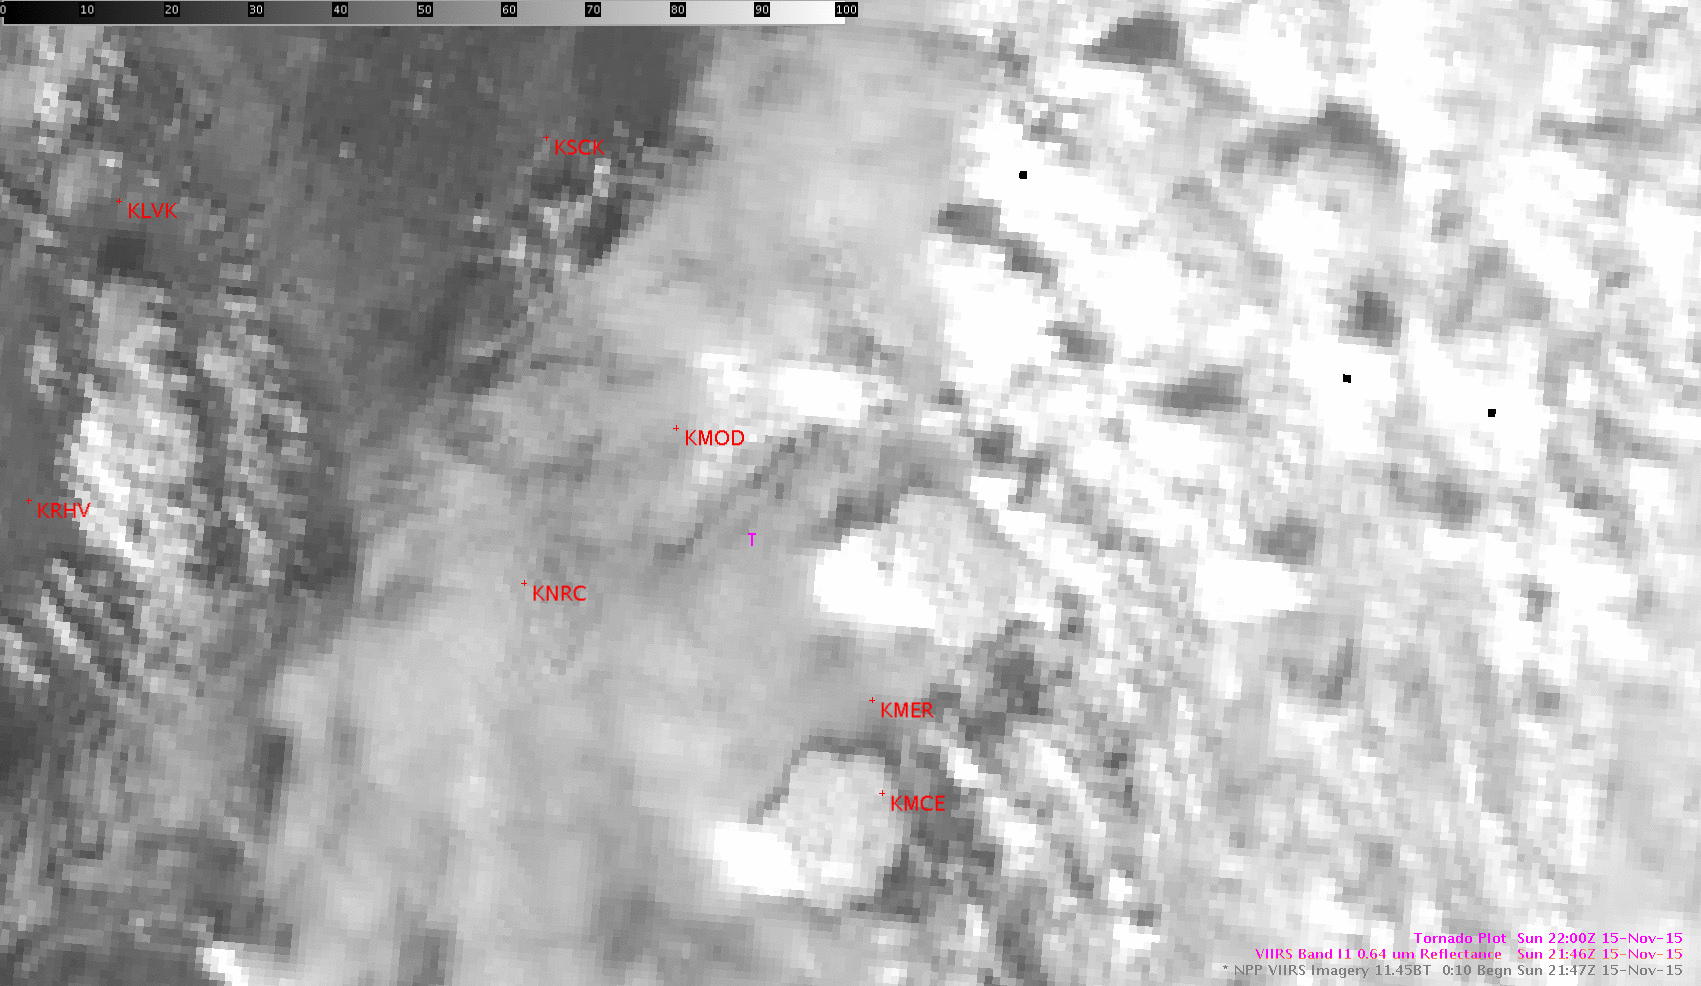 Suomi NPP VIIRS Visible (0.64 µm) and Infrared (11.45 µm) images [click to enlarge]